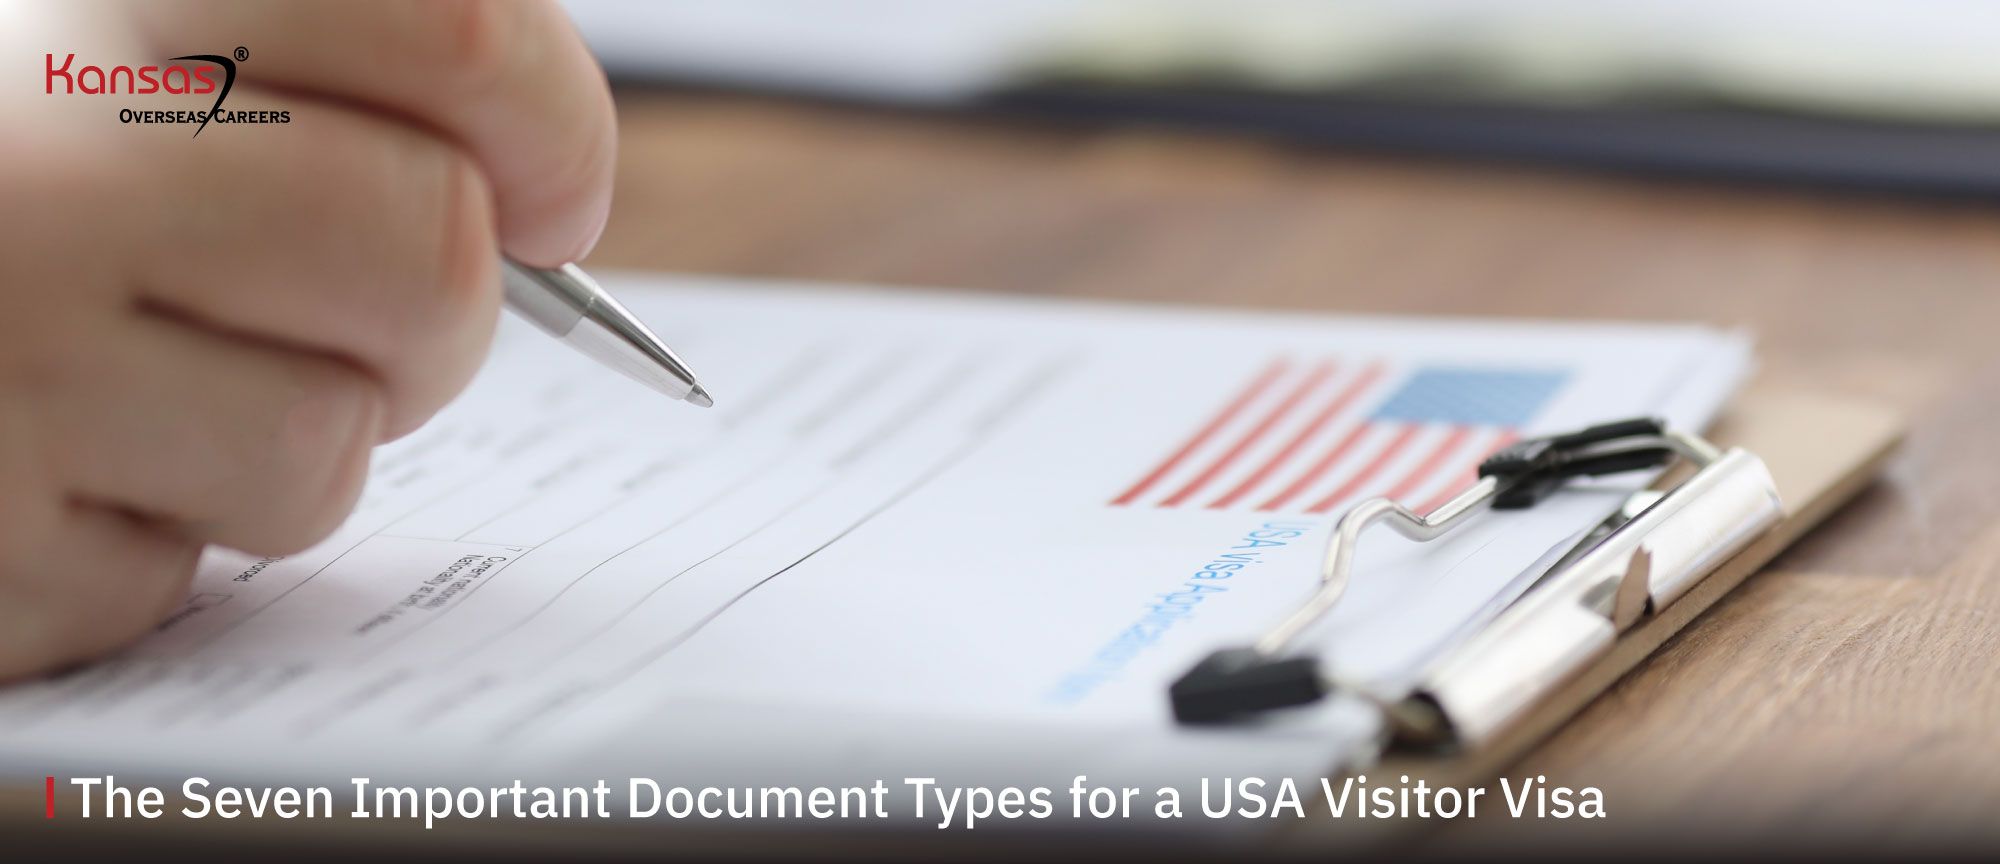 The-Seven-Important-Document-Types-for-a-USA-Visitor-Visa